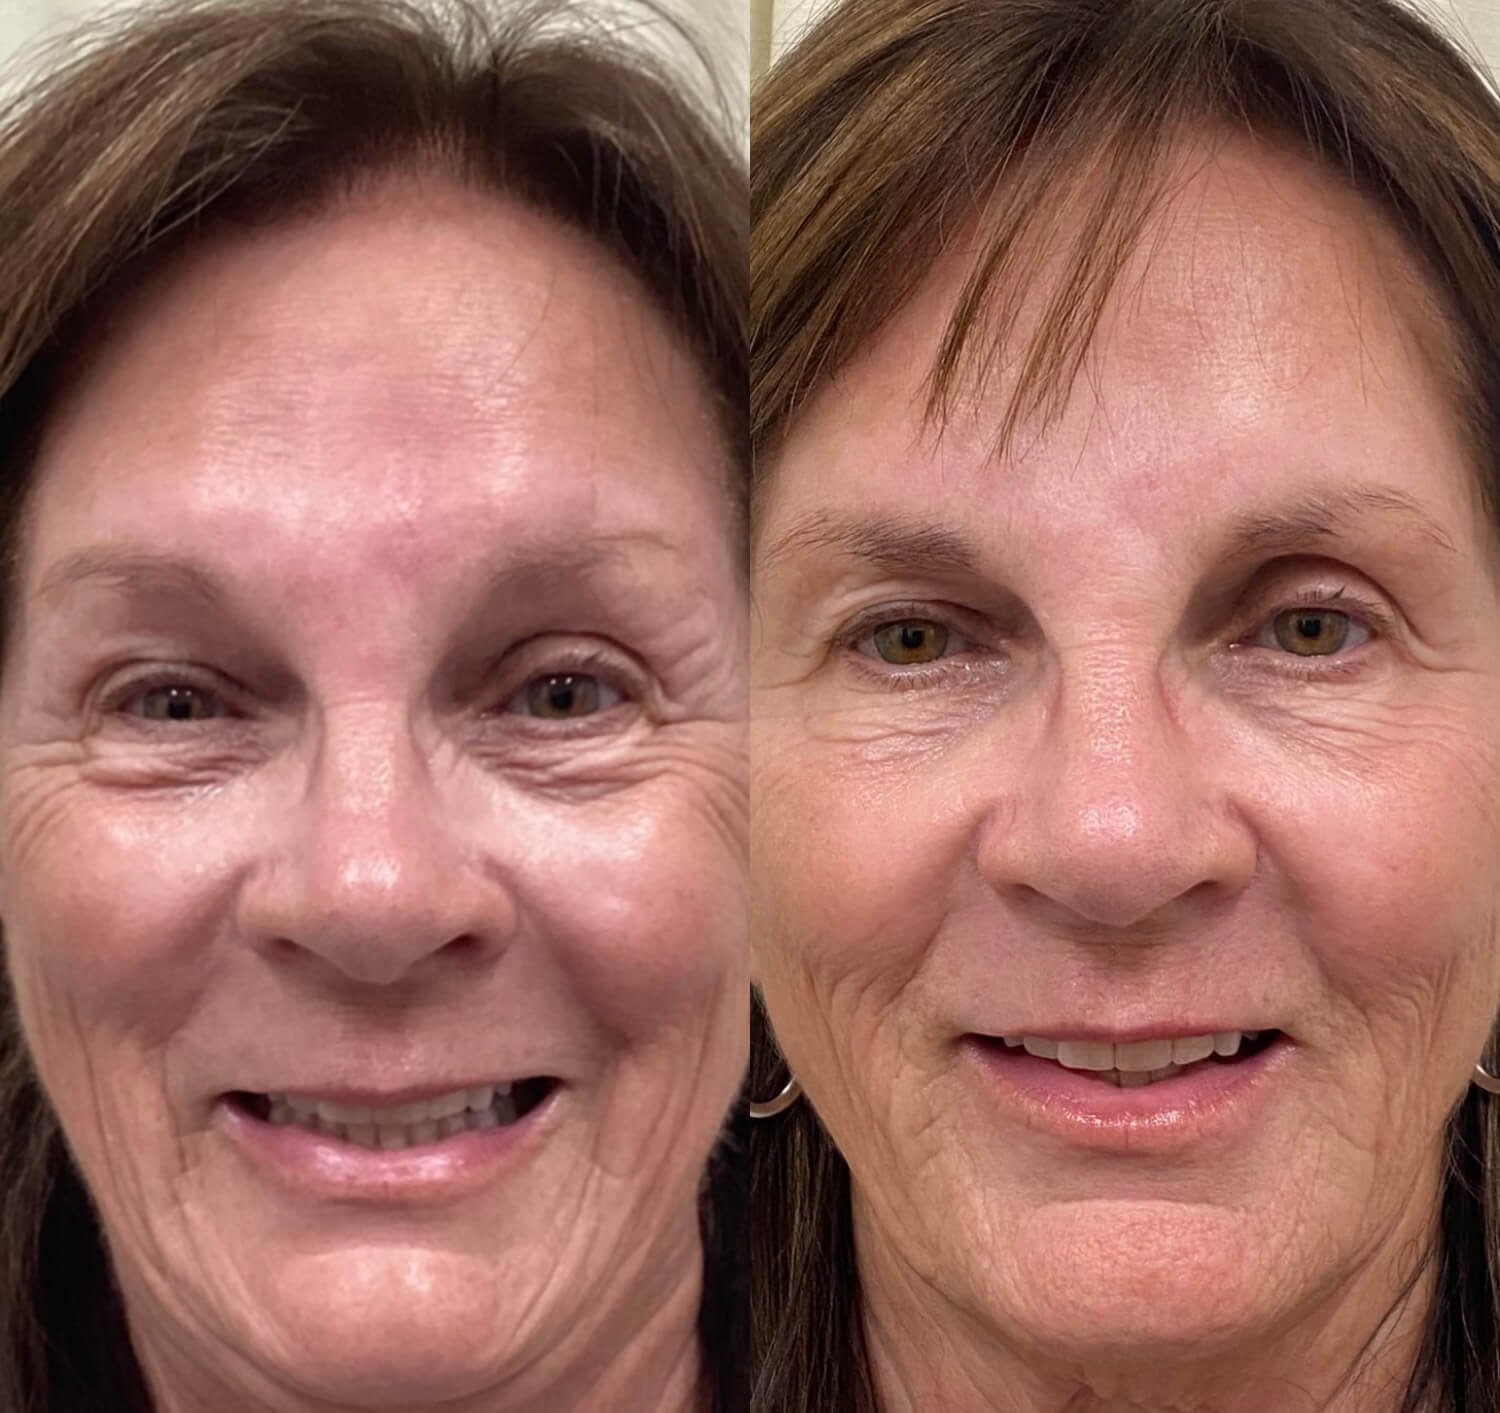 Maggie Cadavero botox for eye wrinkles before and after.jpg